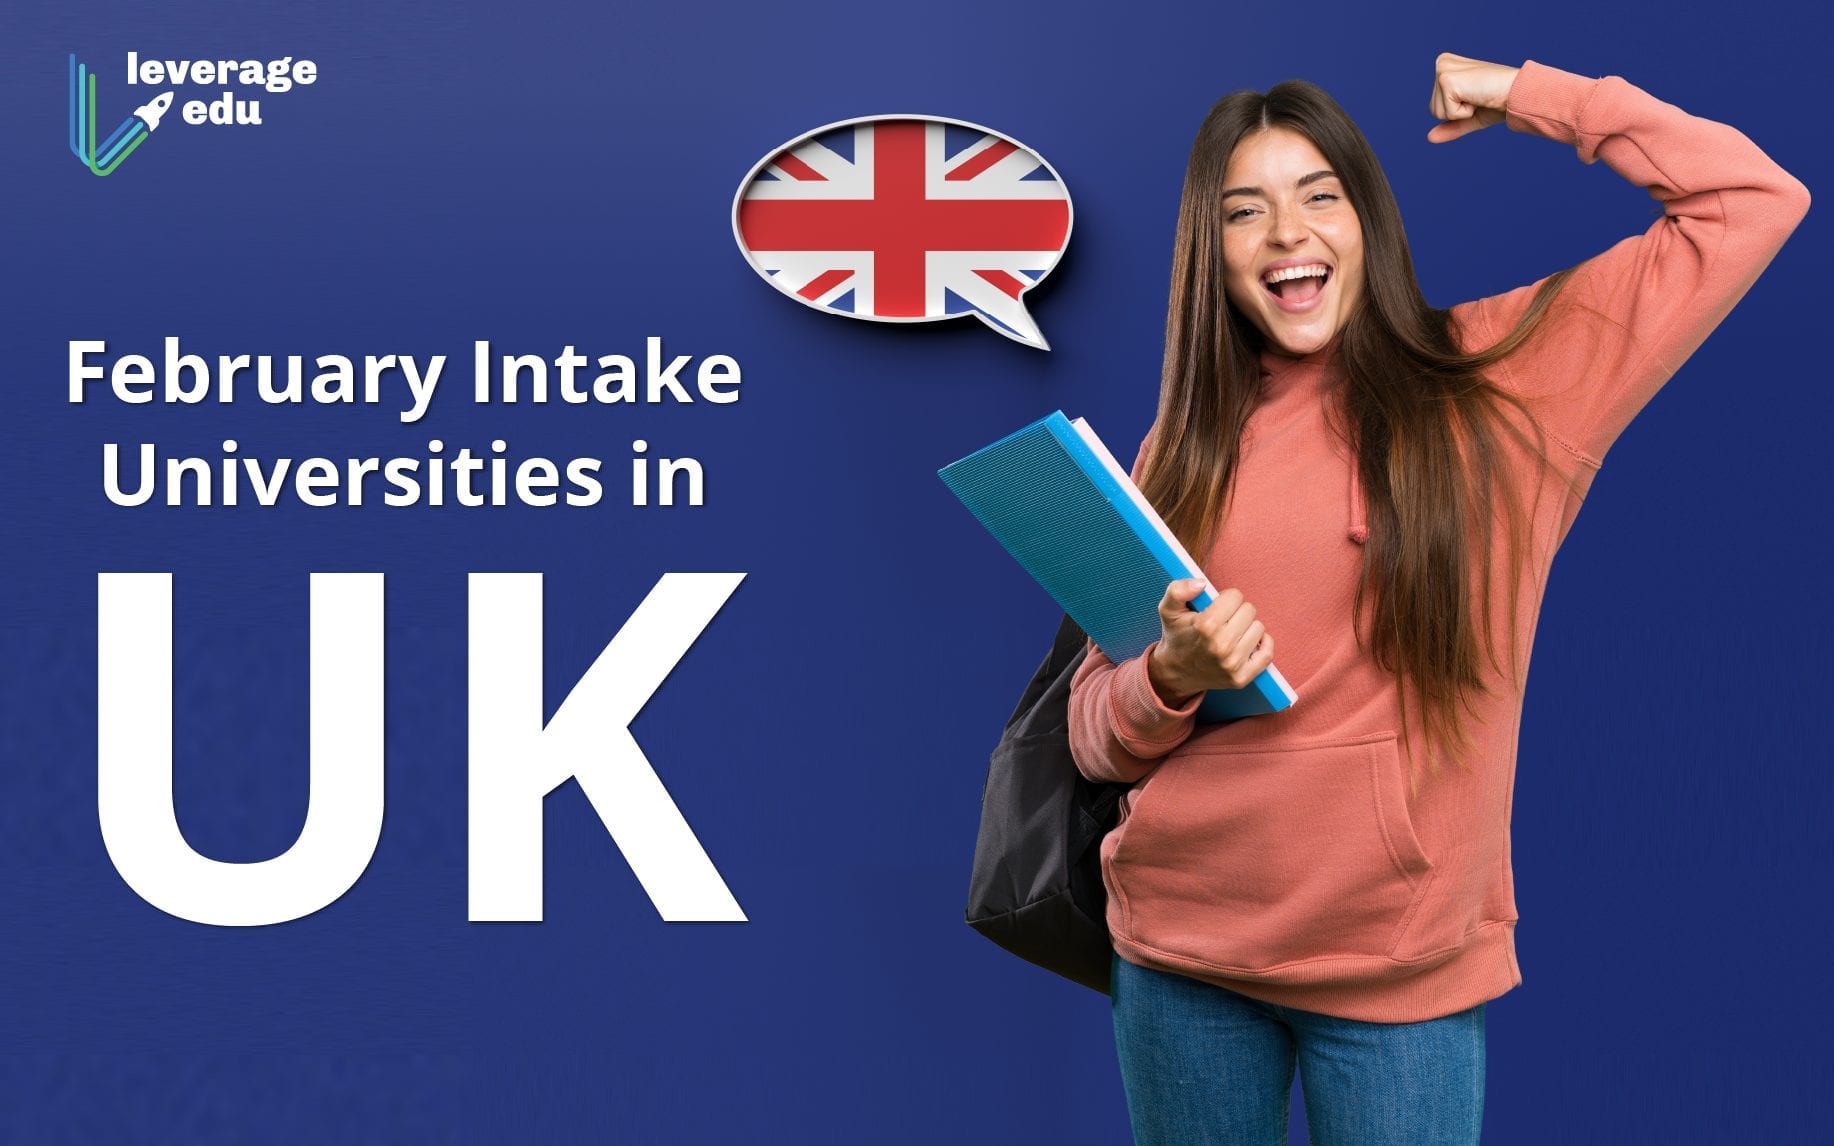 Comment on February Intake Universities in UK by Team Leverage Edu